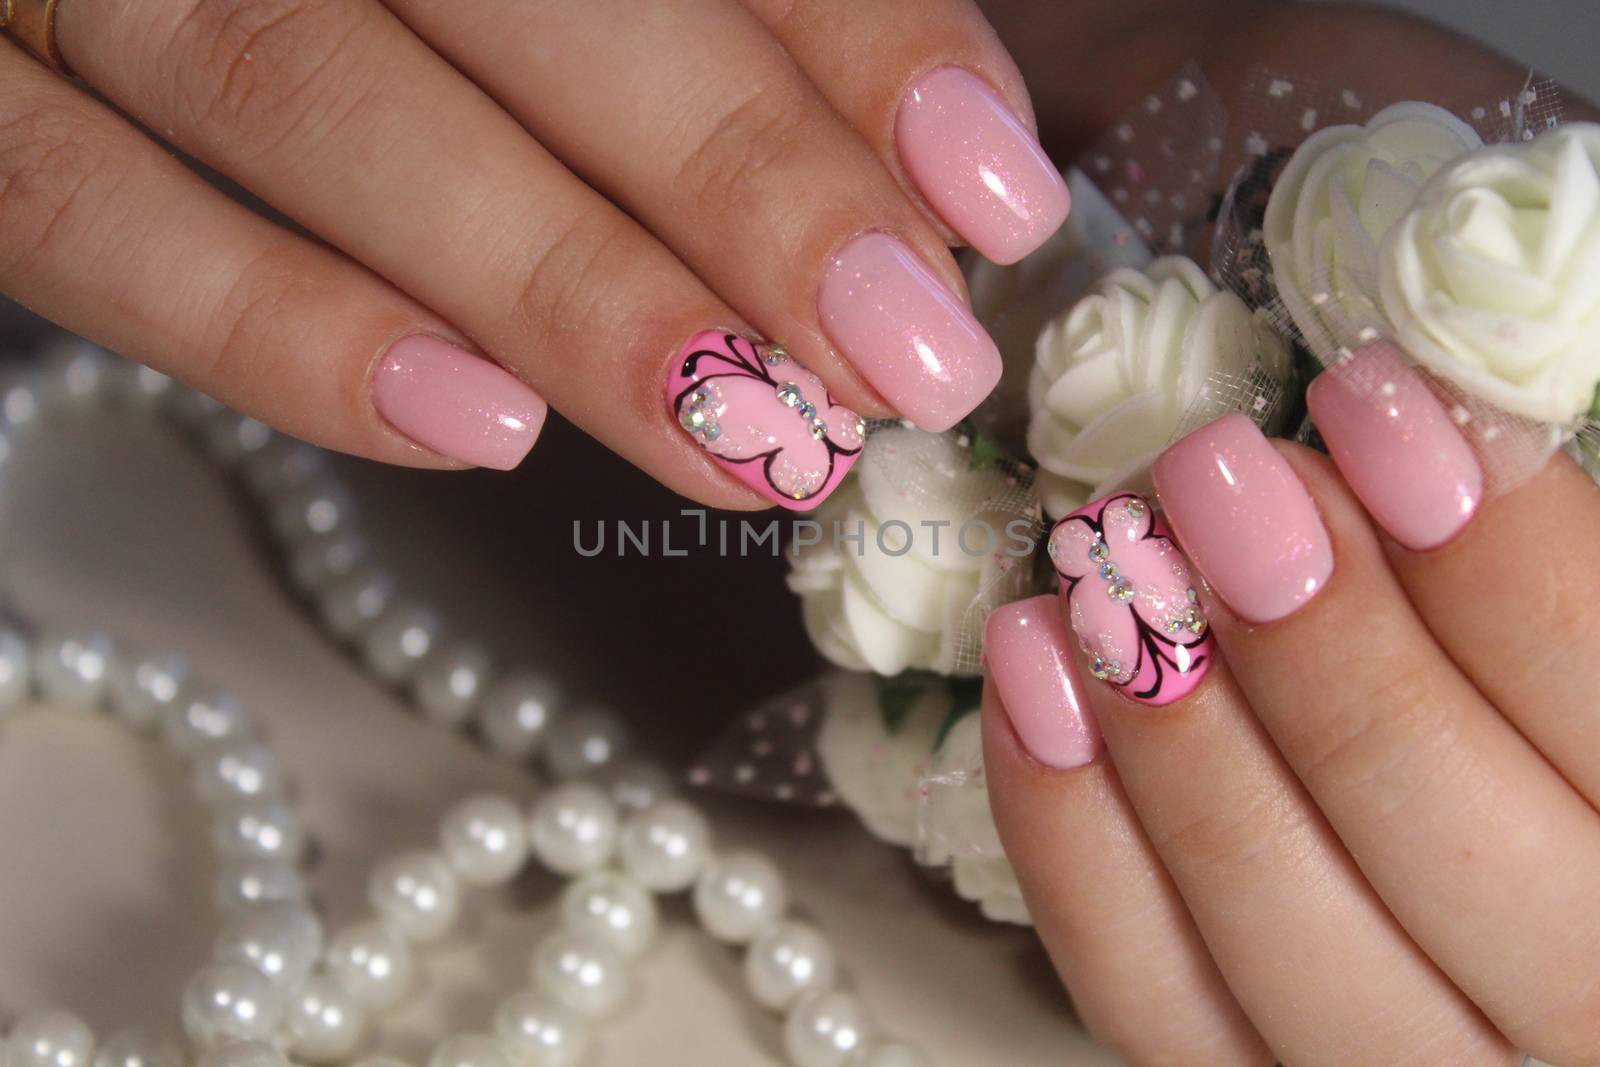 Manicure nail design with a butterfly pattern by SmirMaxStock